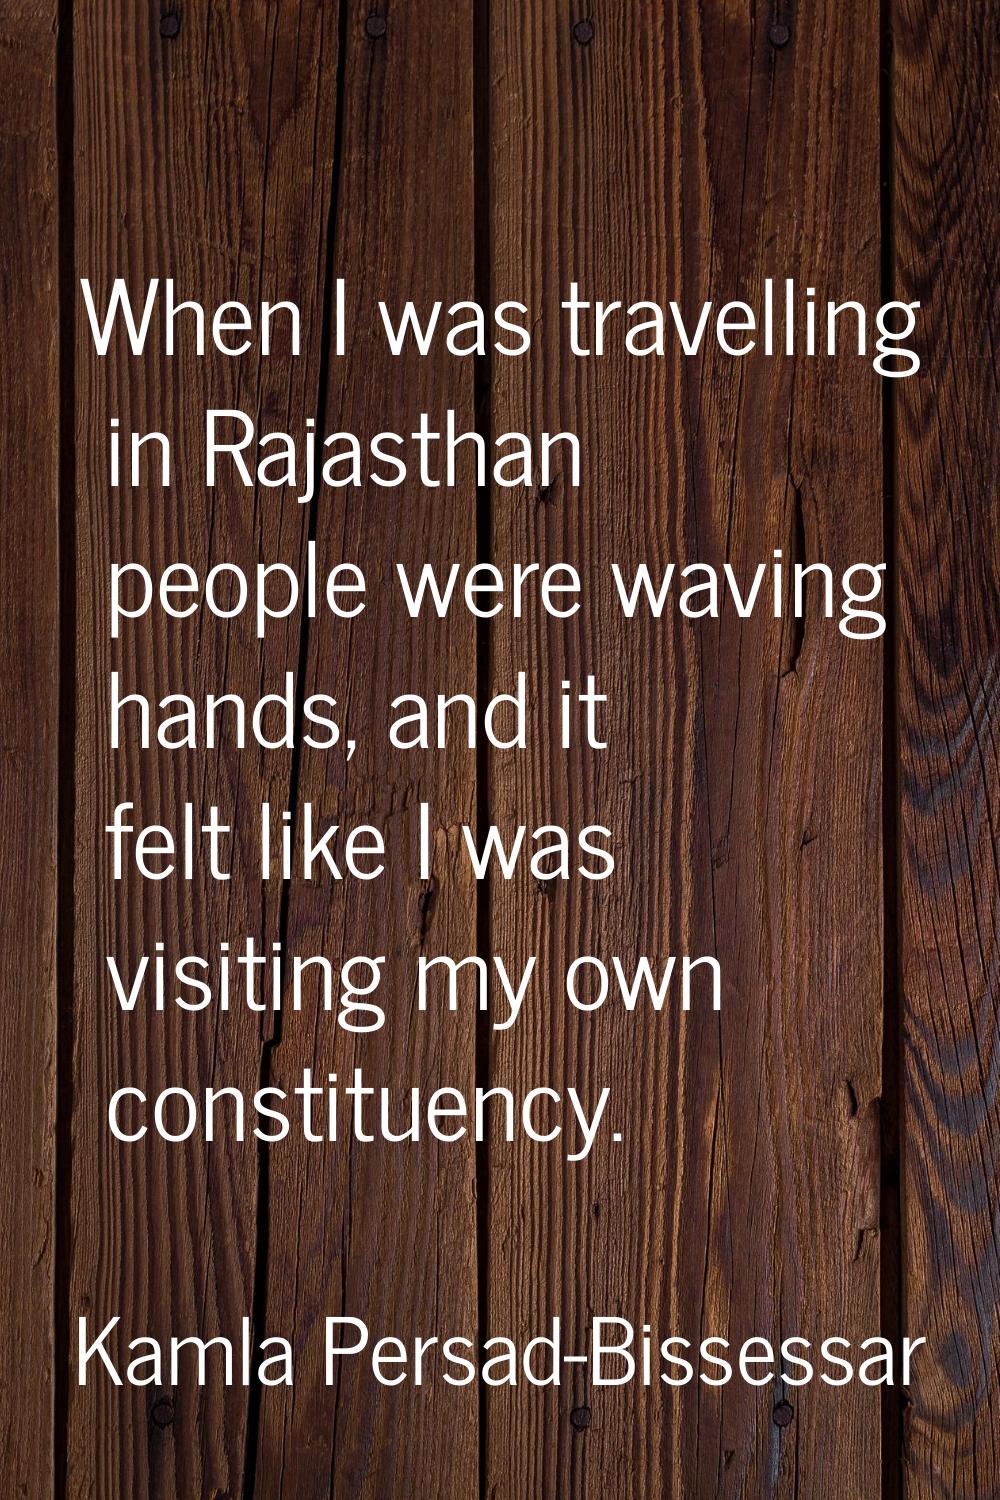 When I was travelling in Rajasthan people were waving hands, and it felt like I was visiting my own